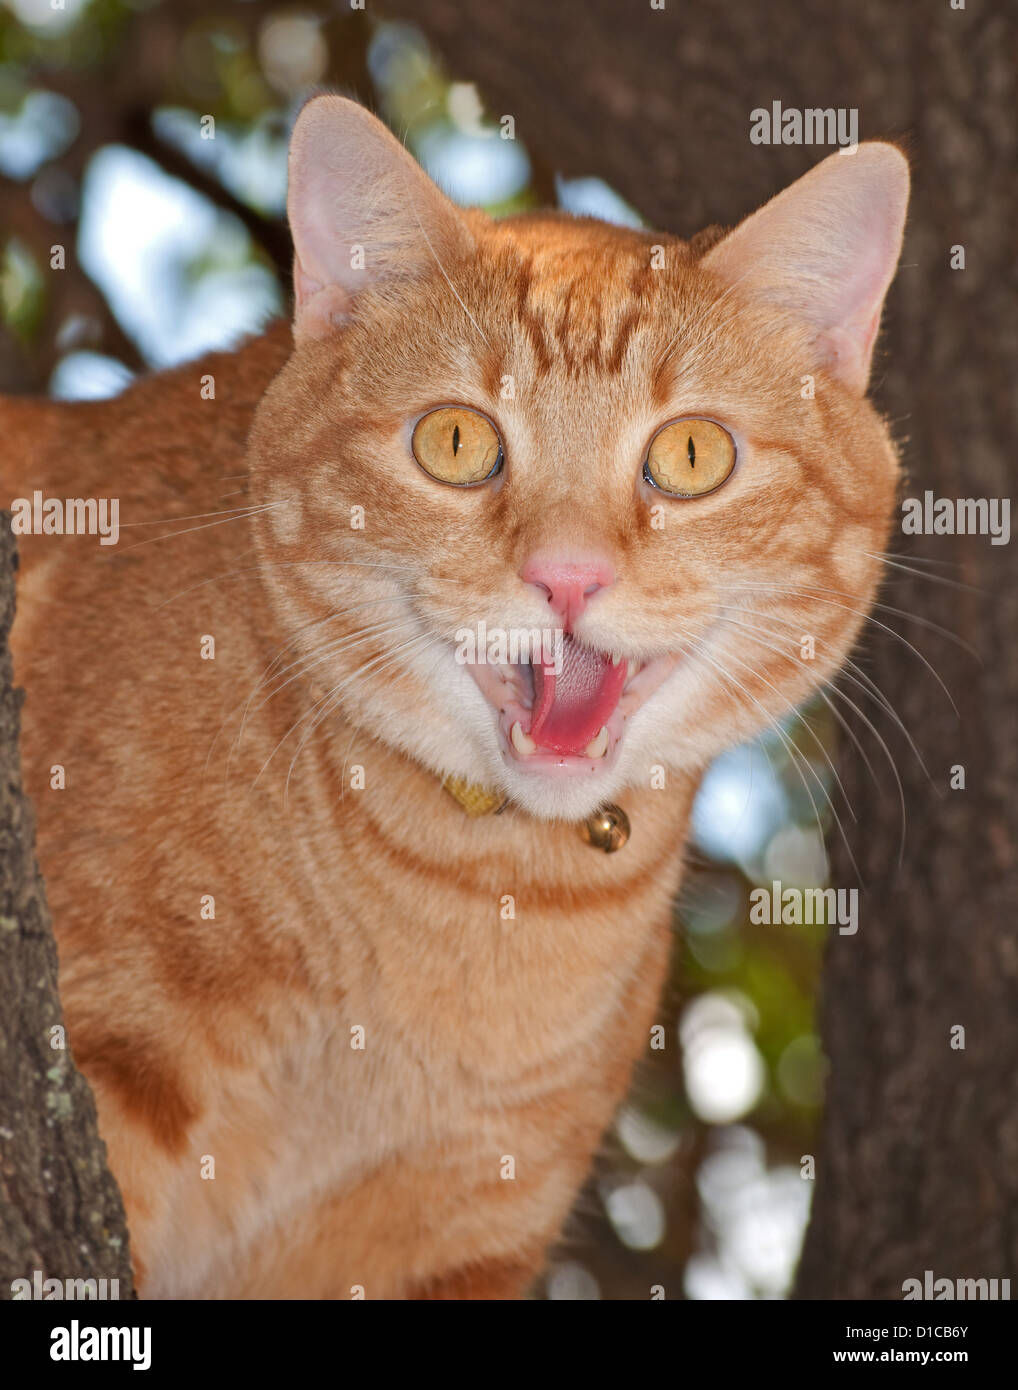 Comical image of a orange tabby cat with his mouth open Stock Photo